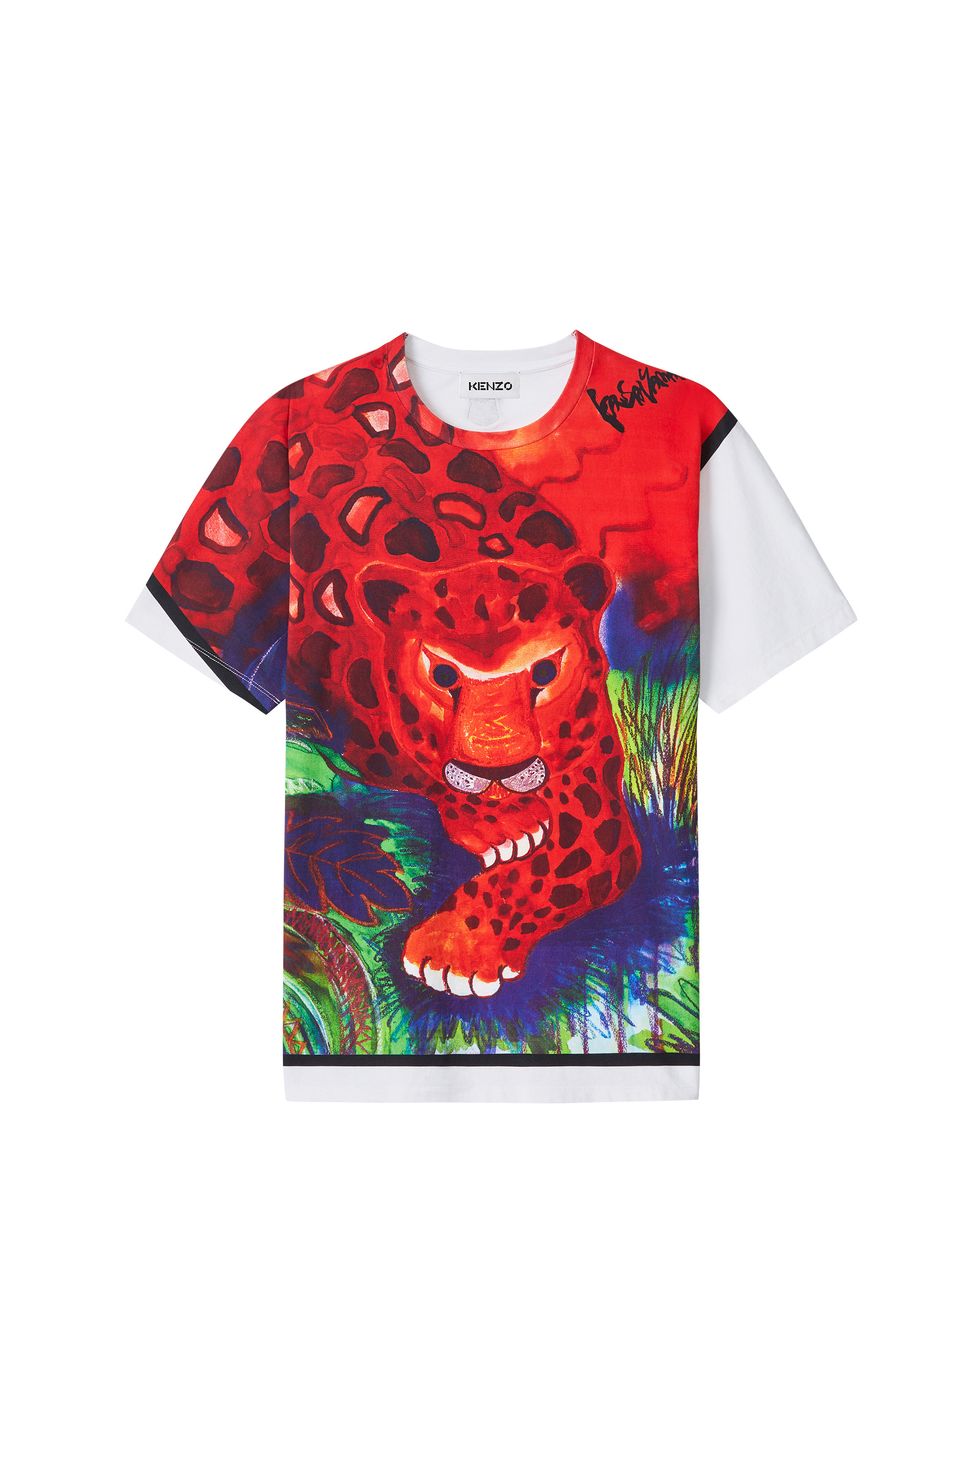 Kenzo develops collab archive collection with Kansai Yamamoto